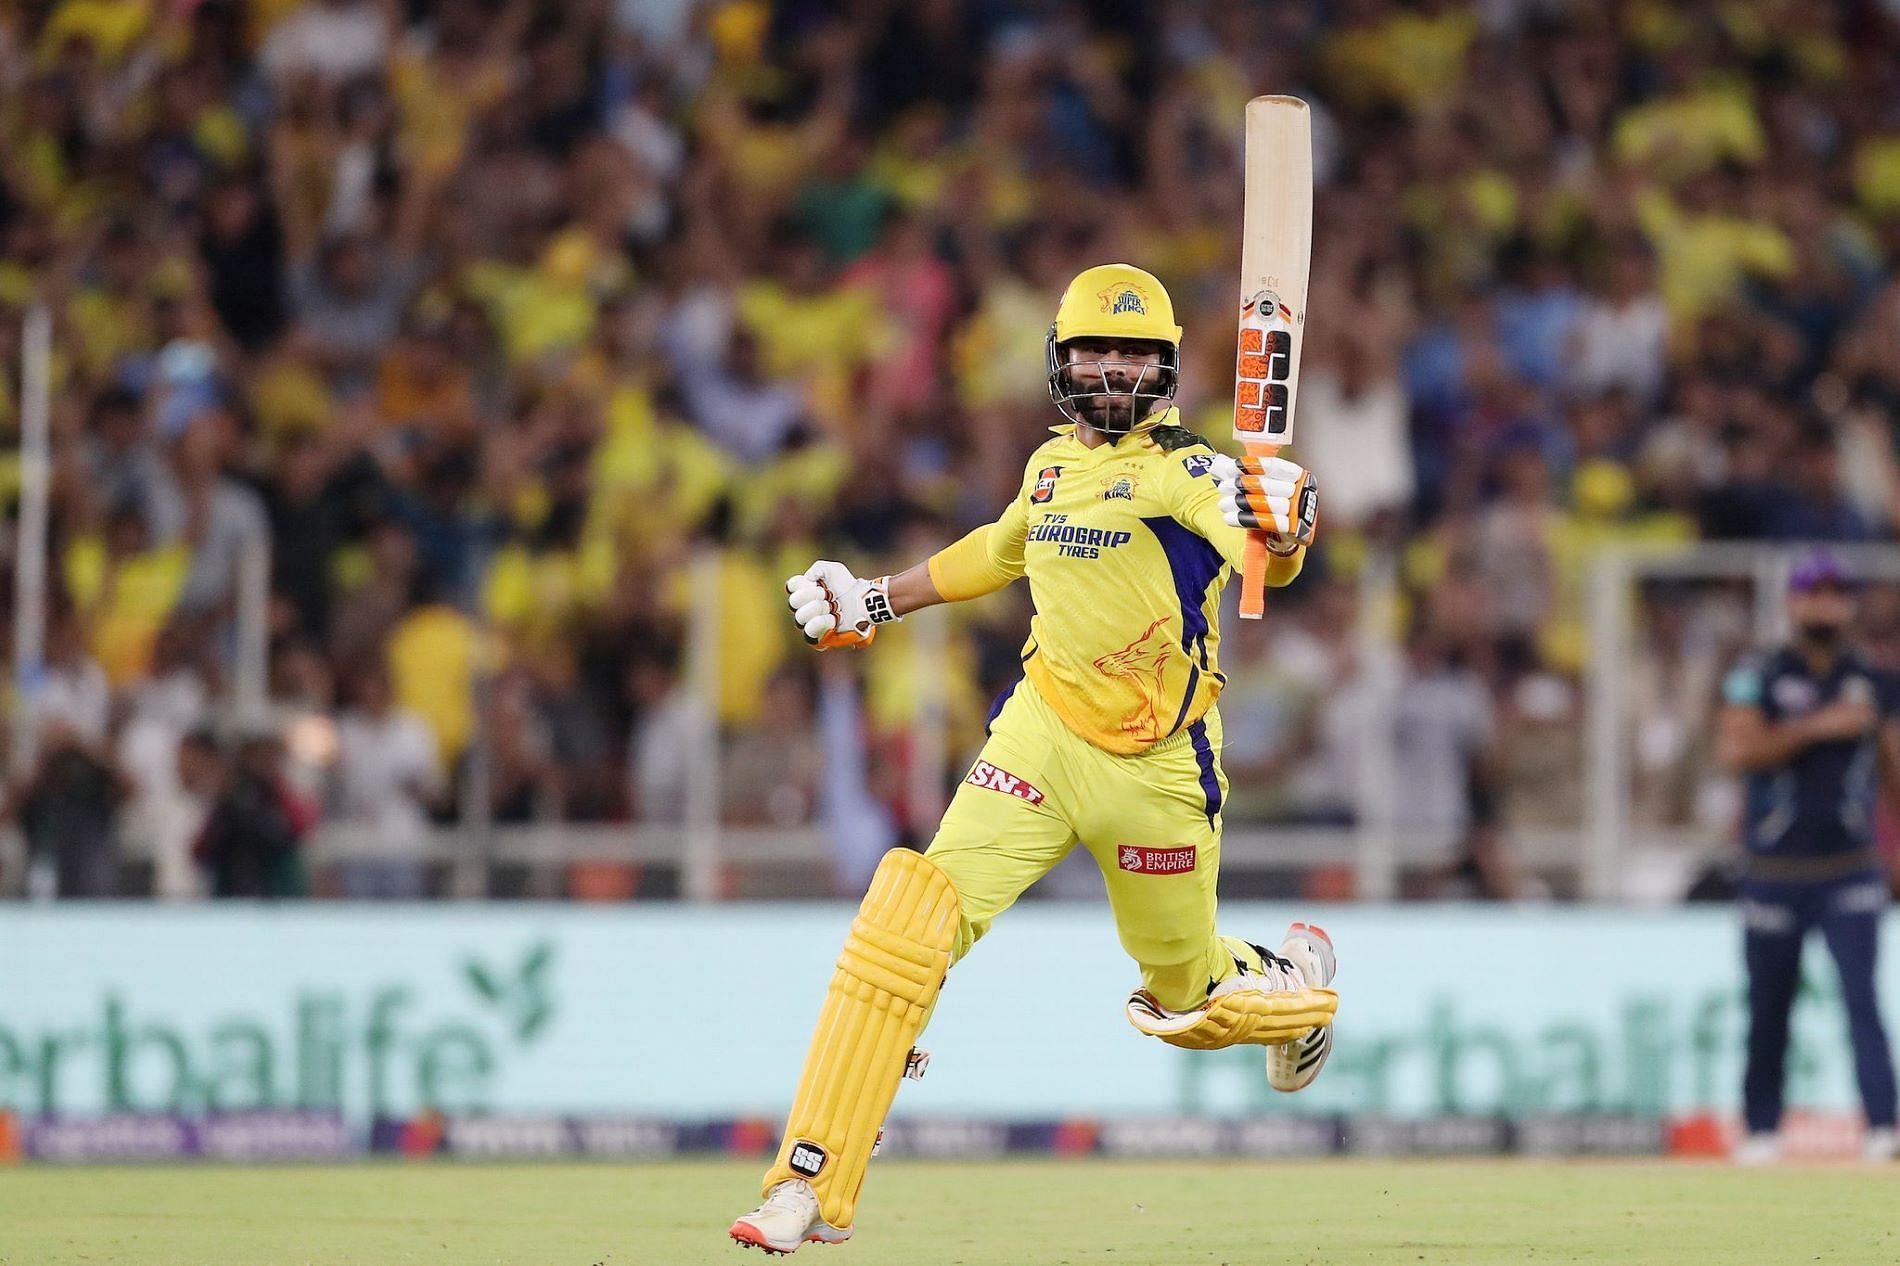 Ravindra Jadeja smashed a last-ball boundary to help CSK clinch their fifth IPL title